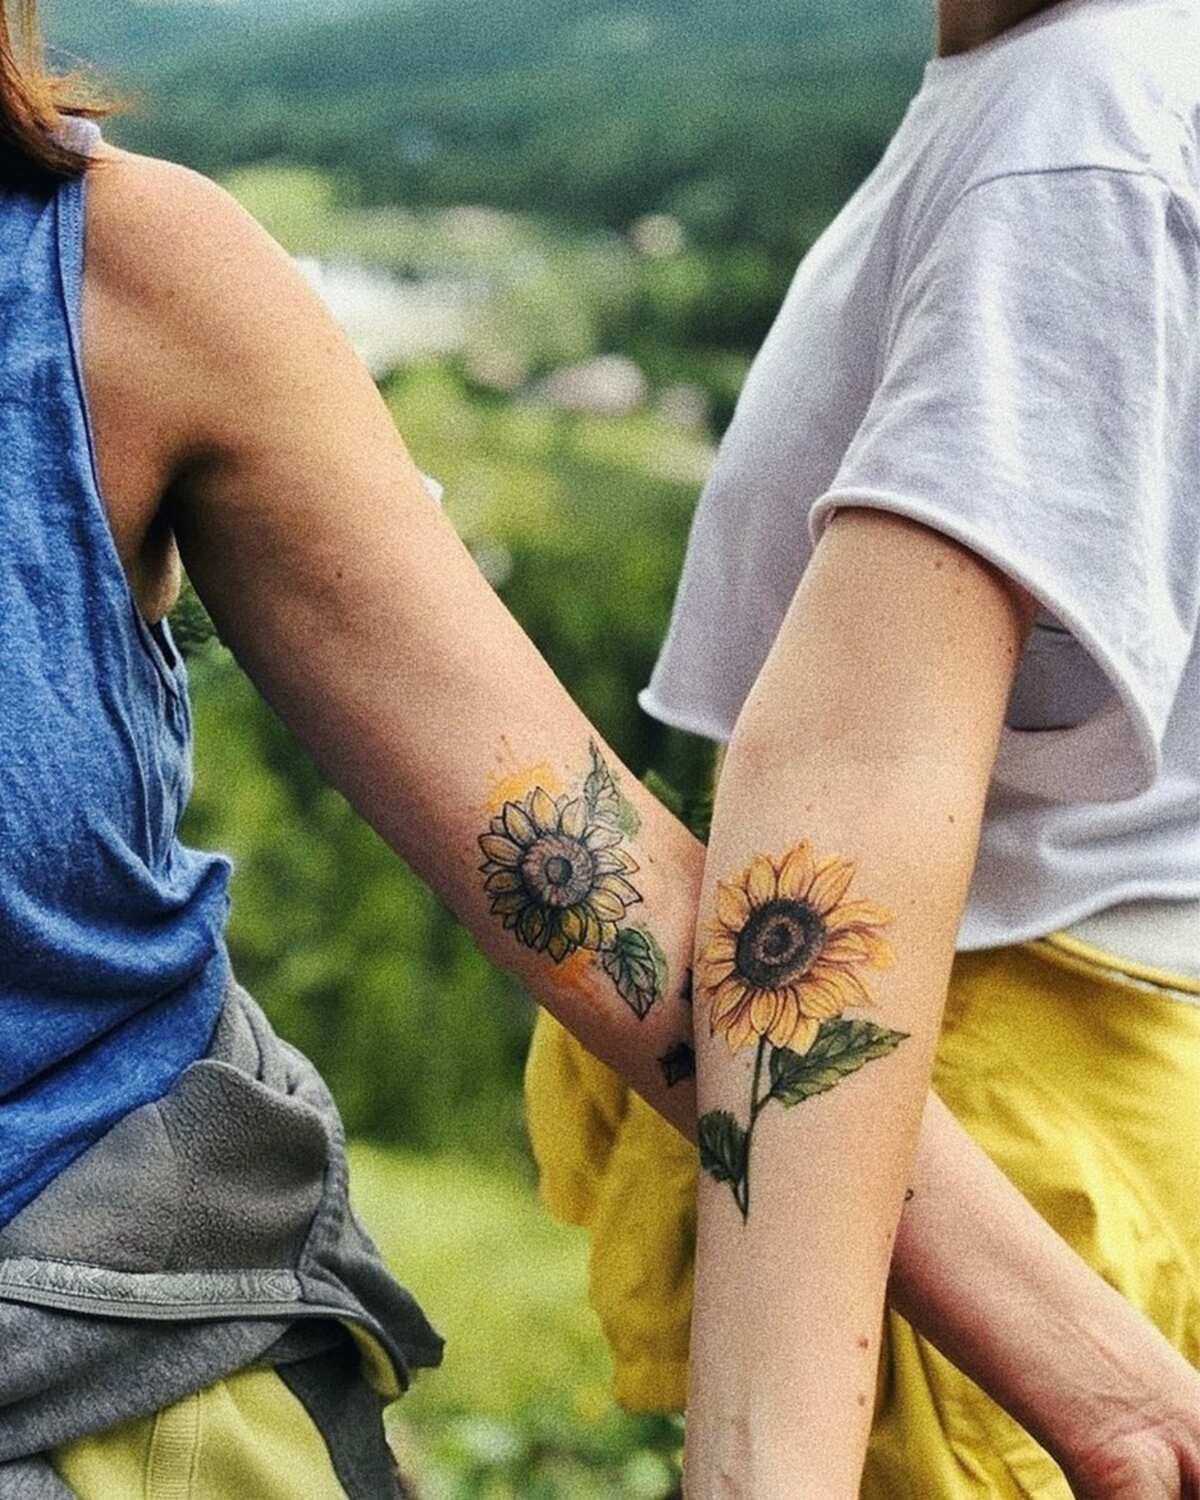 100 Best Friend Tattoos To Commemorate Friendship For You And Your Bestie |  Bored Panda